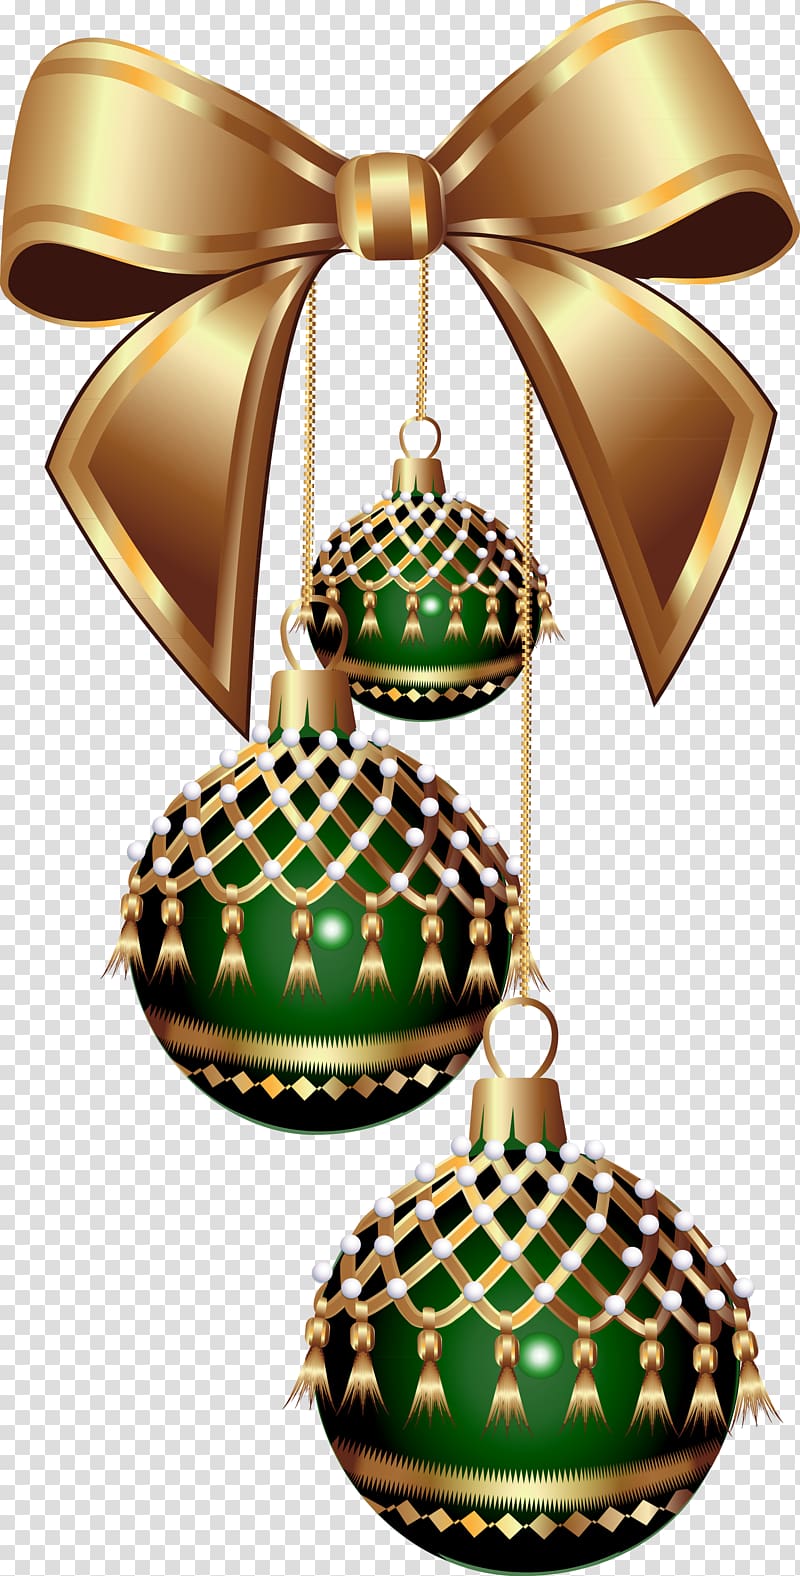 Christmas ornament New Year tree, christmas creative source file transparent background PNG clipart